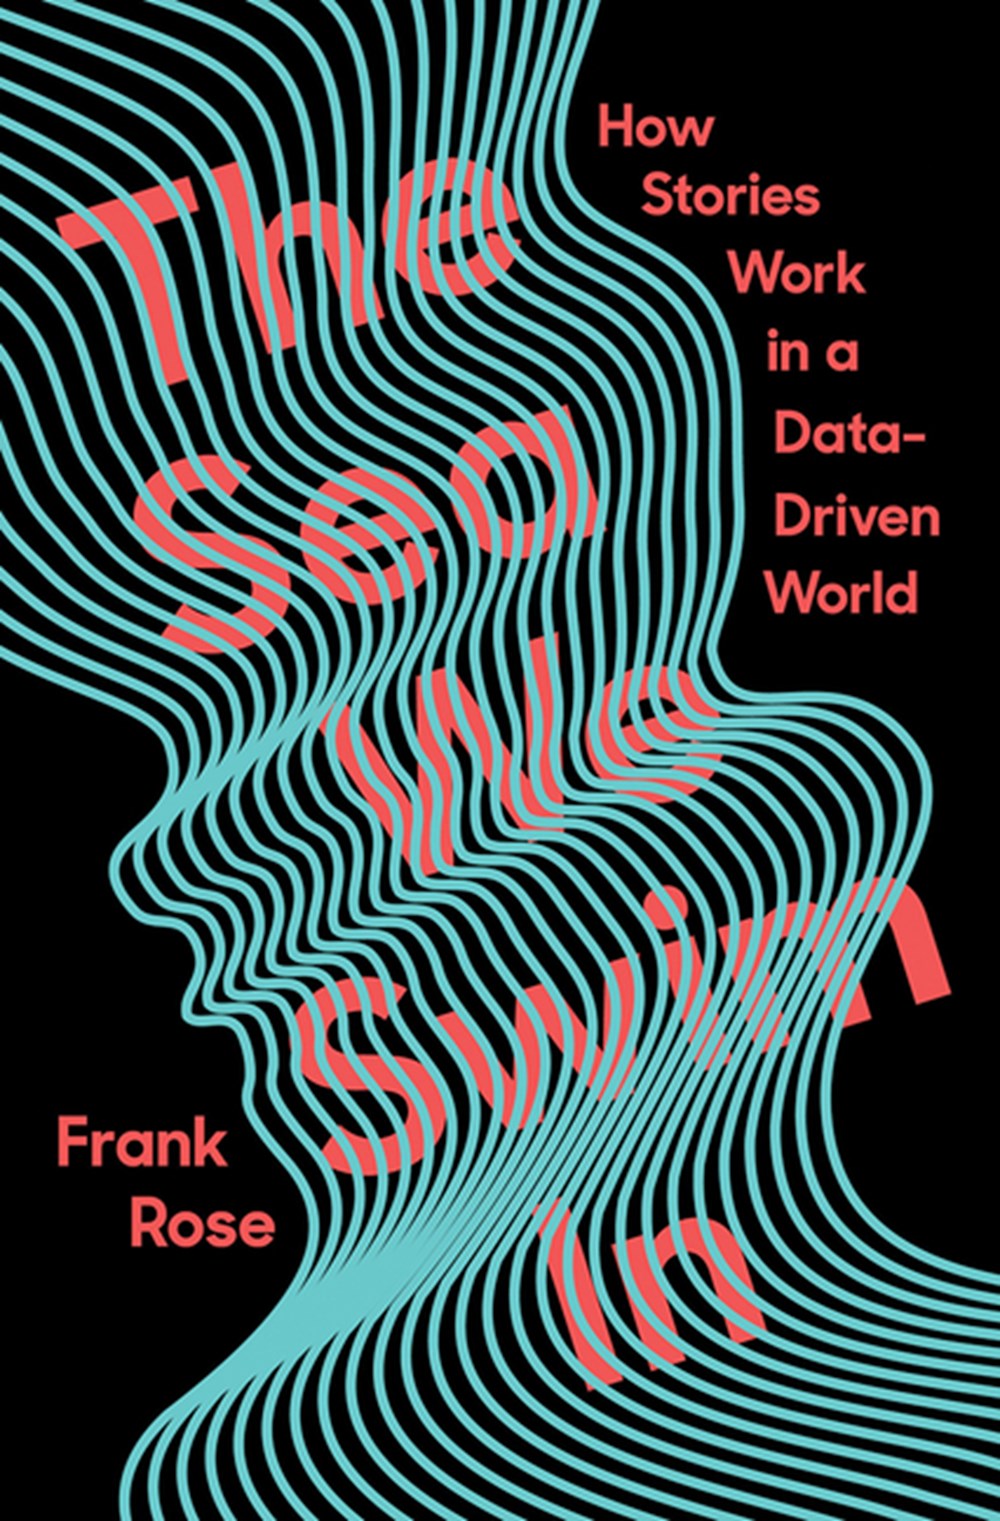 Sea We Swim in How Stories Work in a Data-Driven World